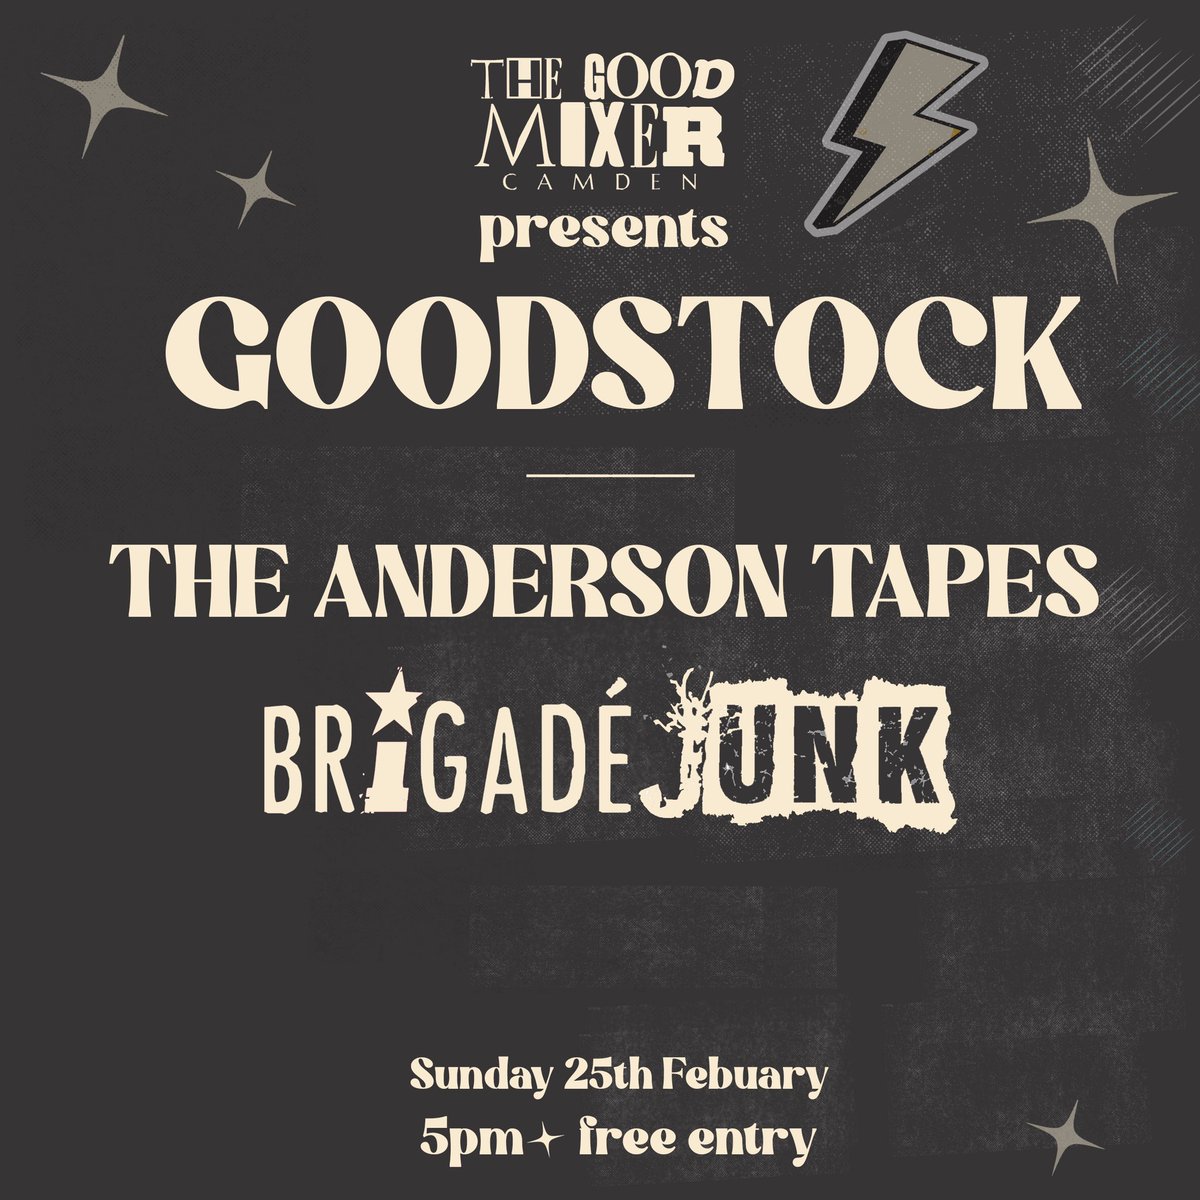 Very excited to be playing at the Good Mixer in Camden on Sunday 25th February with the brilliant @BrigadeJunk